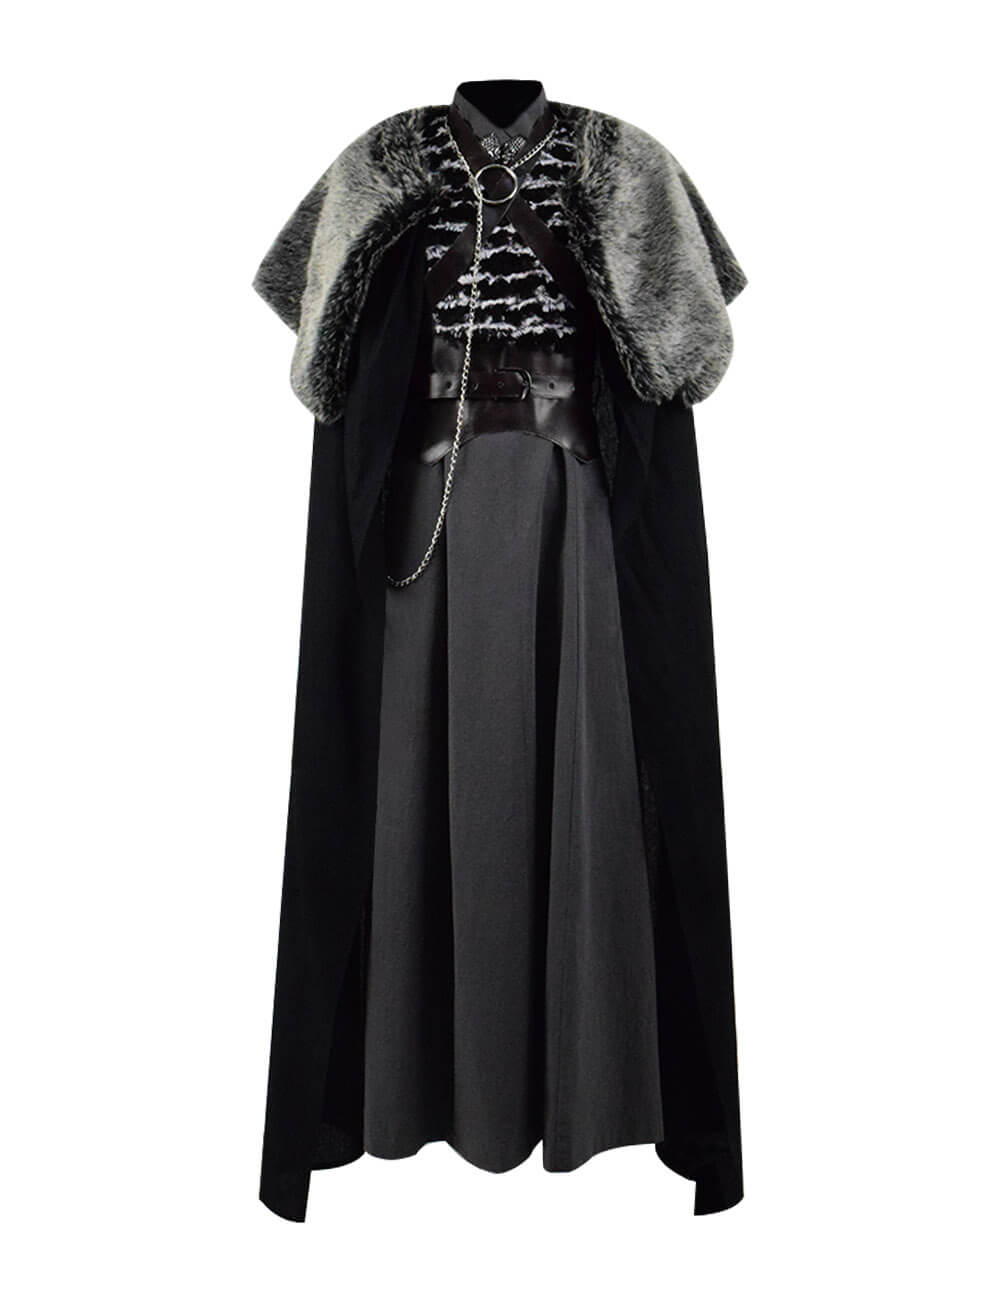 Game of Thrones Sansa Stark Dress Cape Clock Cospaly Costume Ideas For Sale - ACcosplay